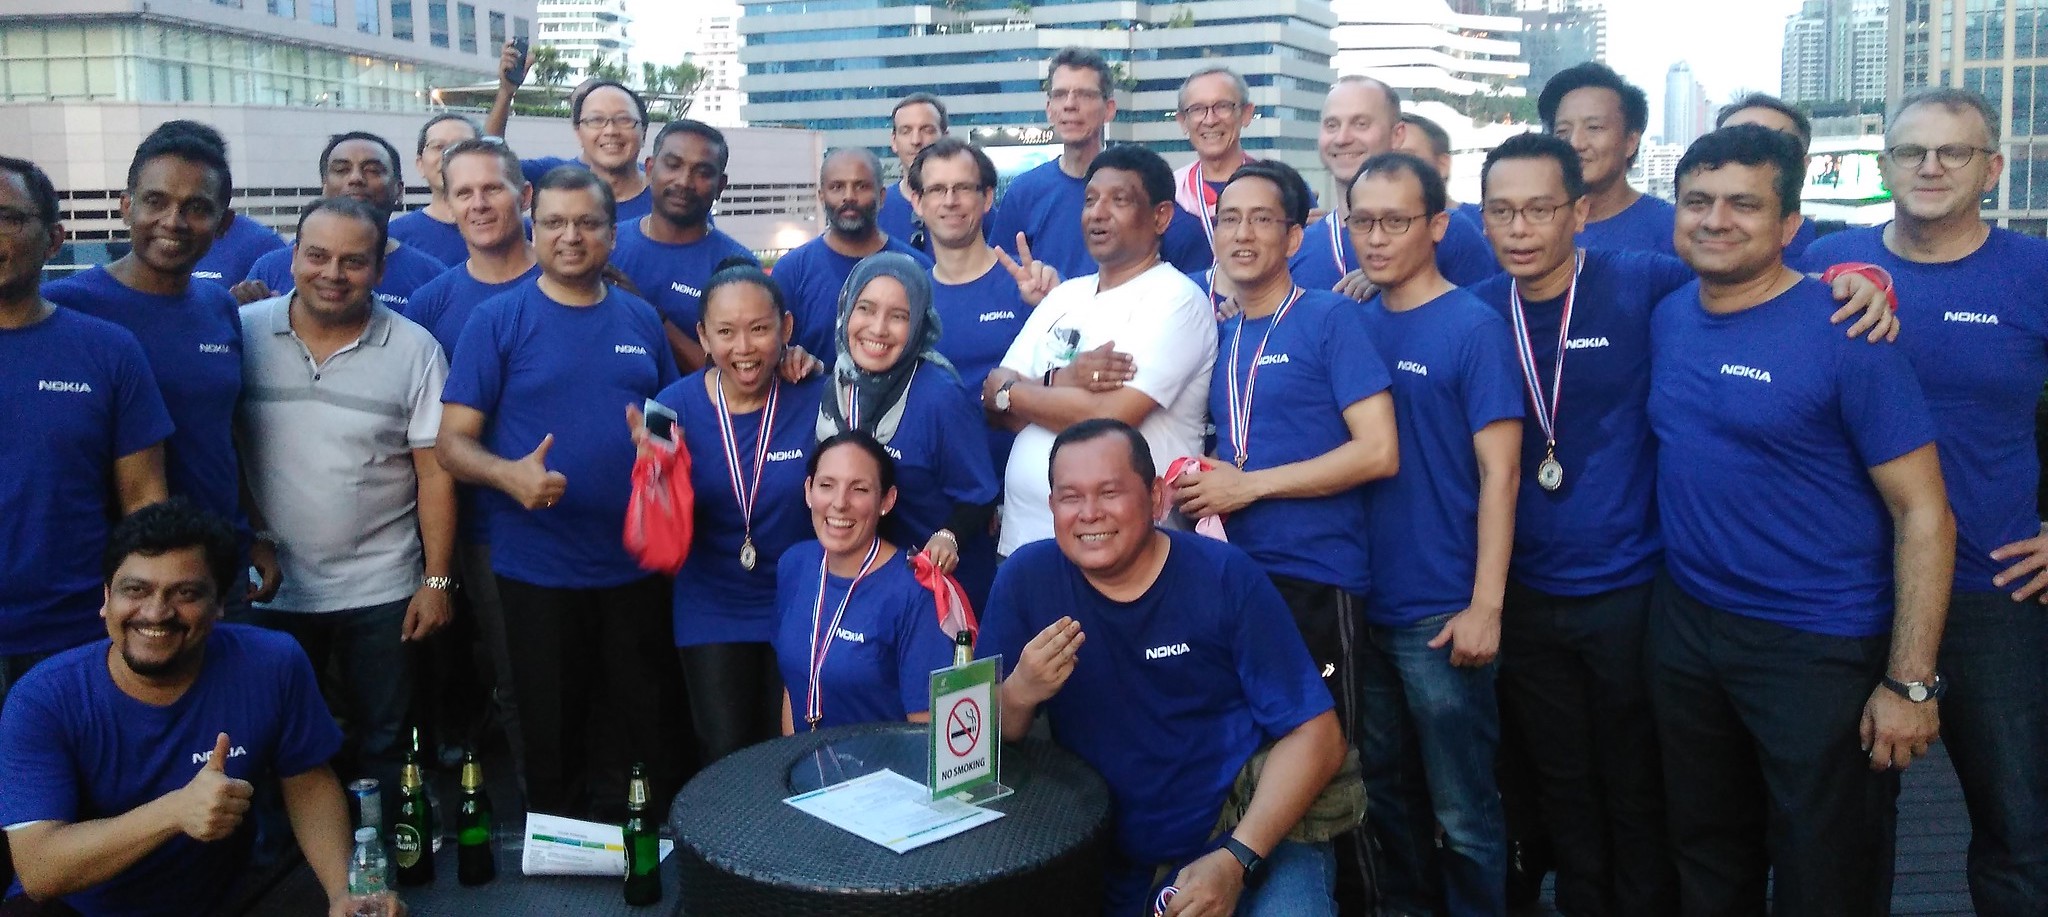 The Cultural Discovery event for NOKIA in Bangkok was a significant success, offering a memorable and meaningful experience that went beyond traditional team building